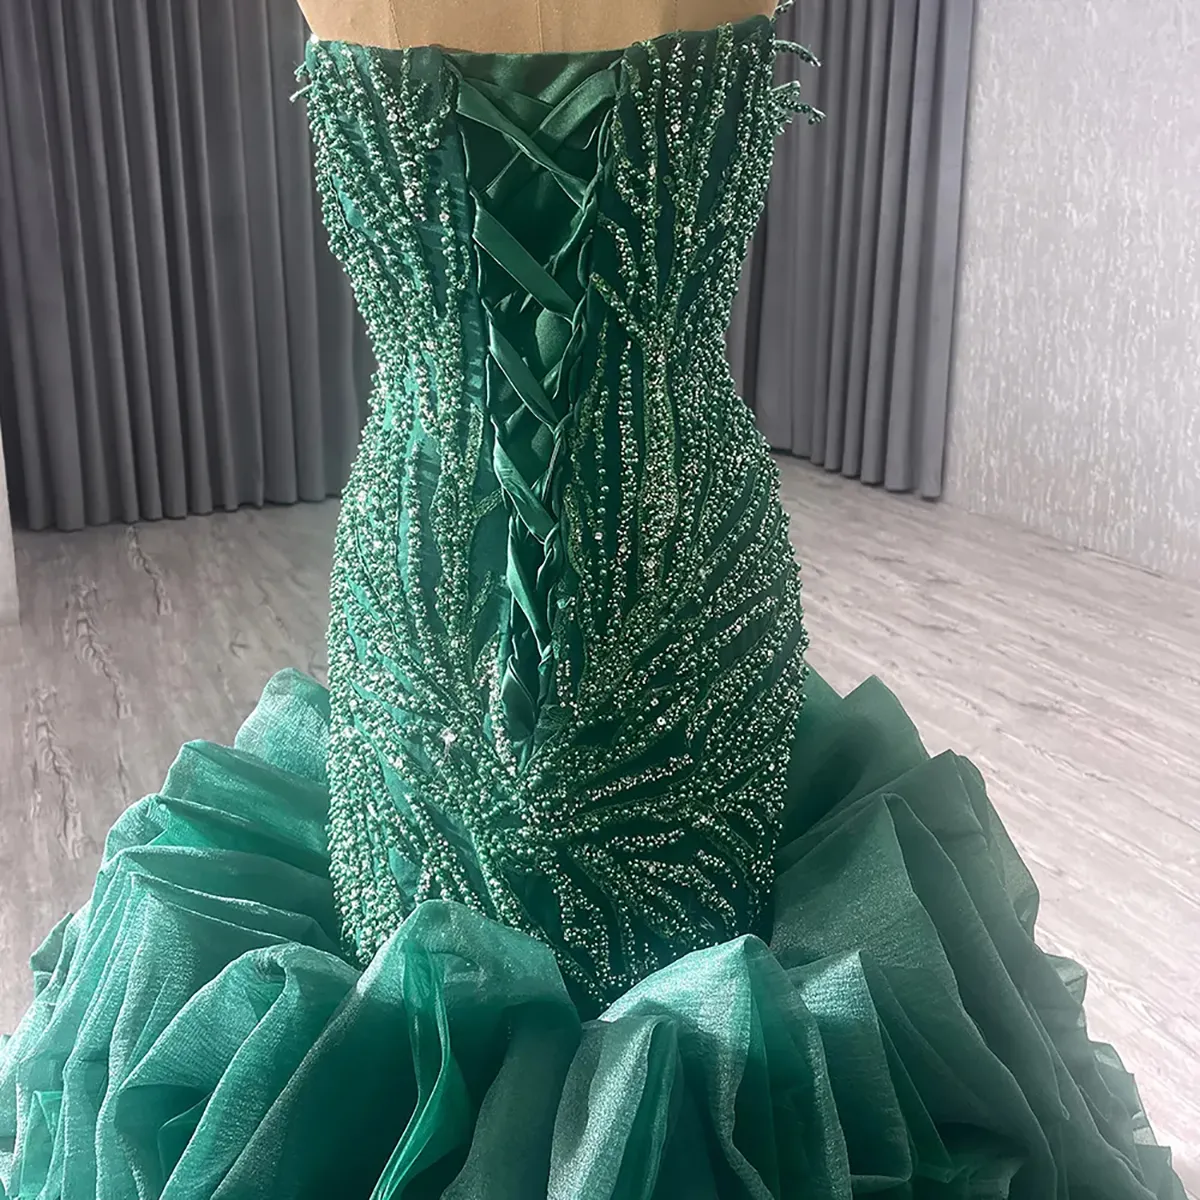 Attractive Mermaid Prom Dresses Sequins Beads Pleats Tiered Sweep Train Lace Up Backless Ruffle Custom Made Shining Party Evening Dress Vestido De Noite